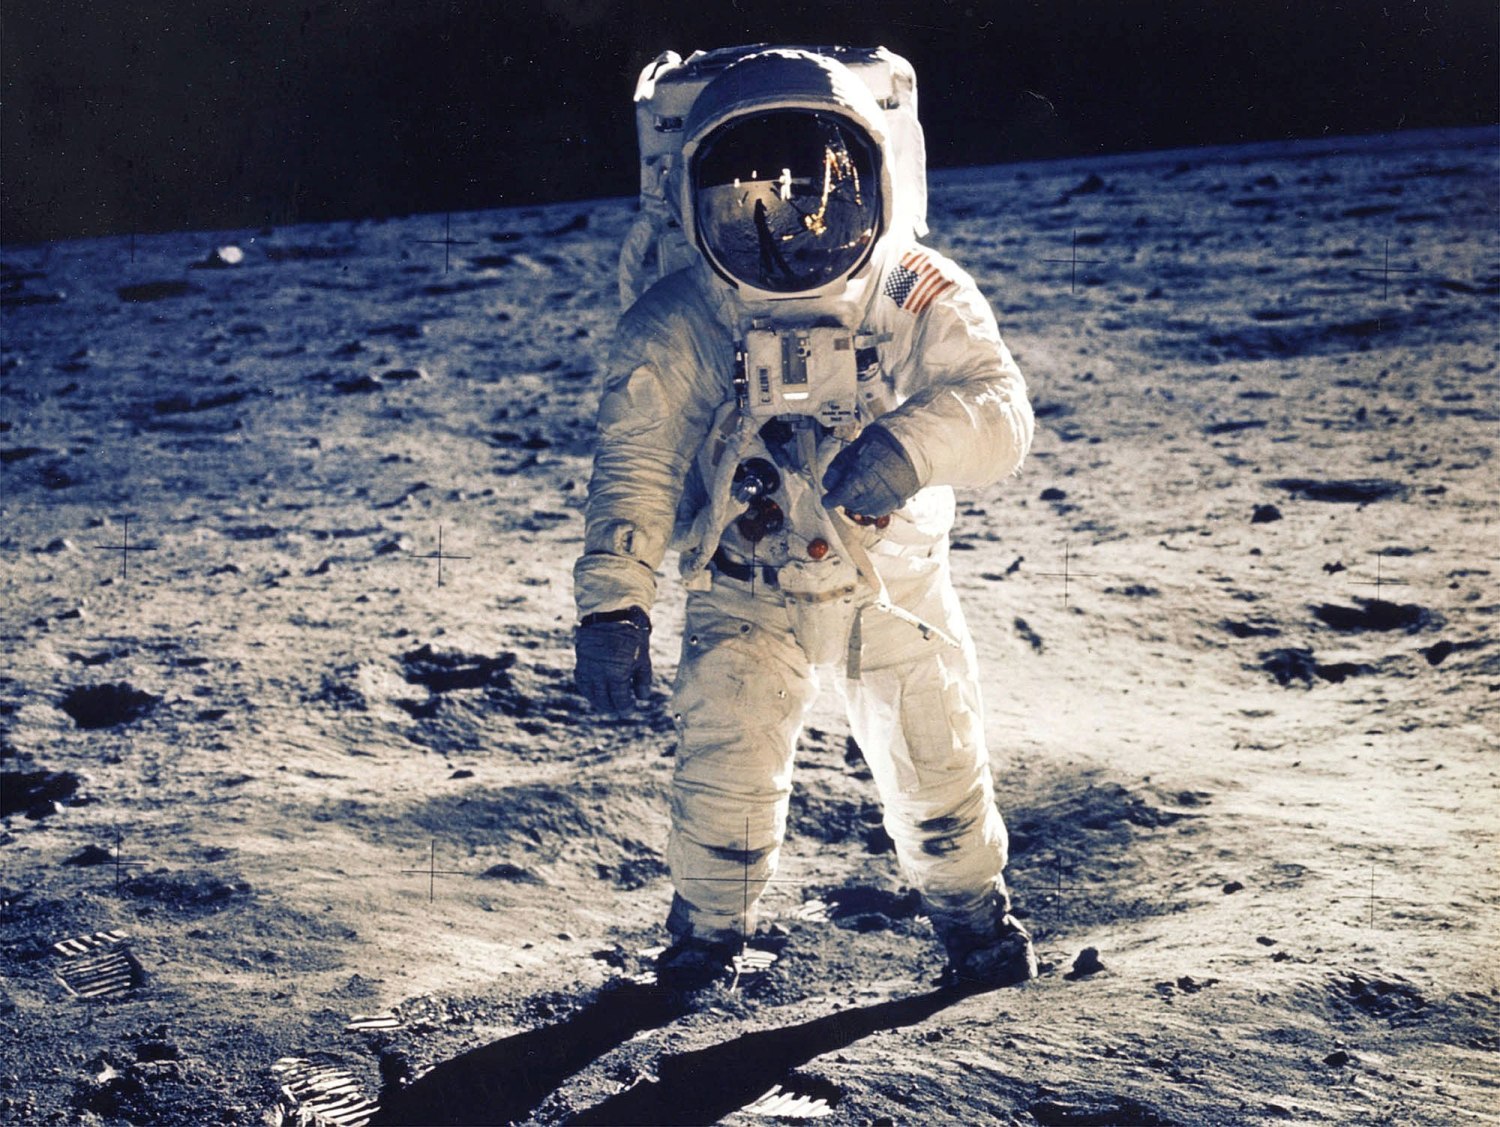 Woman says Neil Armstrong gave her moon dust. She's suing NASA to keep it.